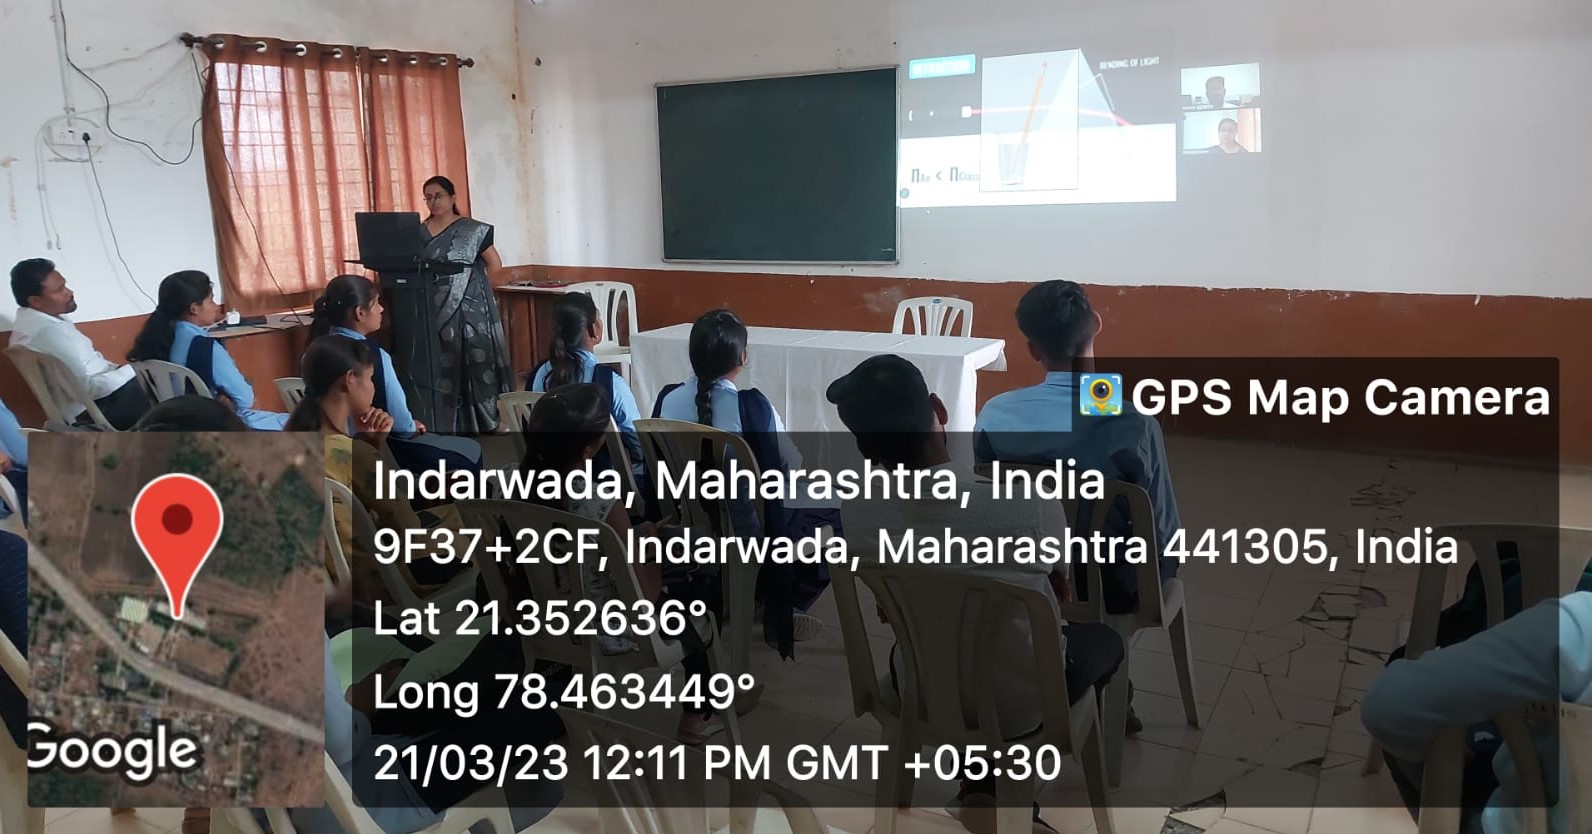 <p>Department of Physics organized the guest lecture for the students of B Sc, an online guest lectrure on FIBER OPTICS on 21th March 2023</p>

<p>Topic: Guest Lecture by Dr. Kailash Gedekar, Assistant Professor, Dept of Physics,K.D.K.College of Engineering ,Nagpur on the topic &#39;&#39;Fiber Optic&#39;&#39;<br />
Time: Mar 21, 2023 11:15 AM India</p>

<p>Join Zoom Meeting:<a href="https://us04web.zoom.us/j/76692000559?pwd=2x3sBywNfDhMGvdBRnIDBAnlPBCW5O.1 ">https://us04web.zoom.us/j/76692000559?pwd=2x3sBywNfDhMGvdBRnIDBAnlPBCW5O.1&nbsp;</a></p>

<p>Meeting ID: 766 9200 0559<br />
Passcode: C3QA34</p>
